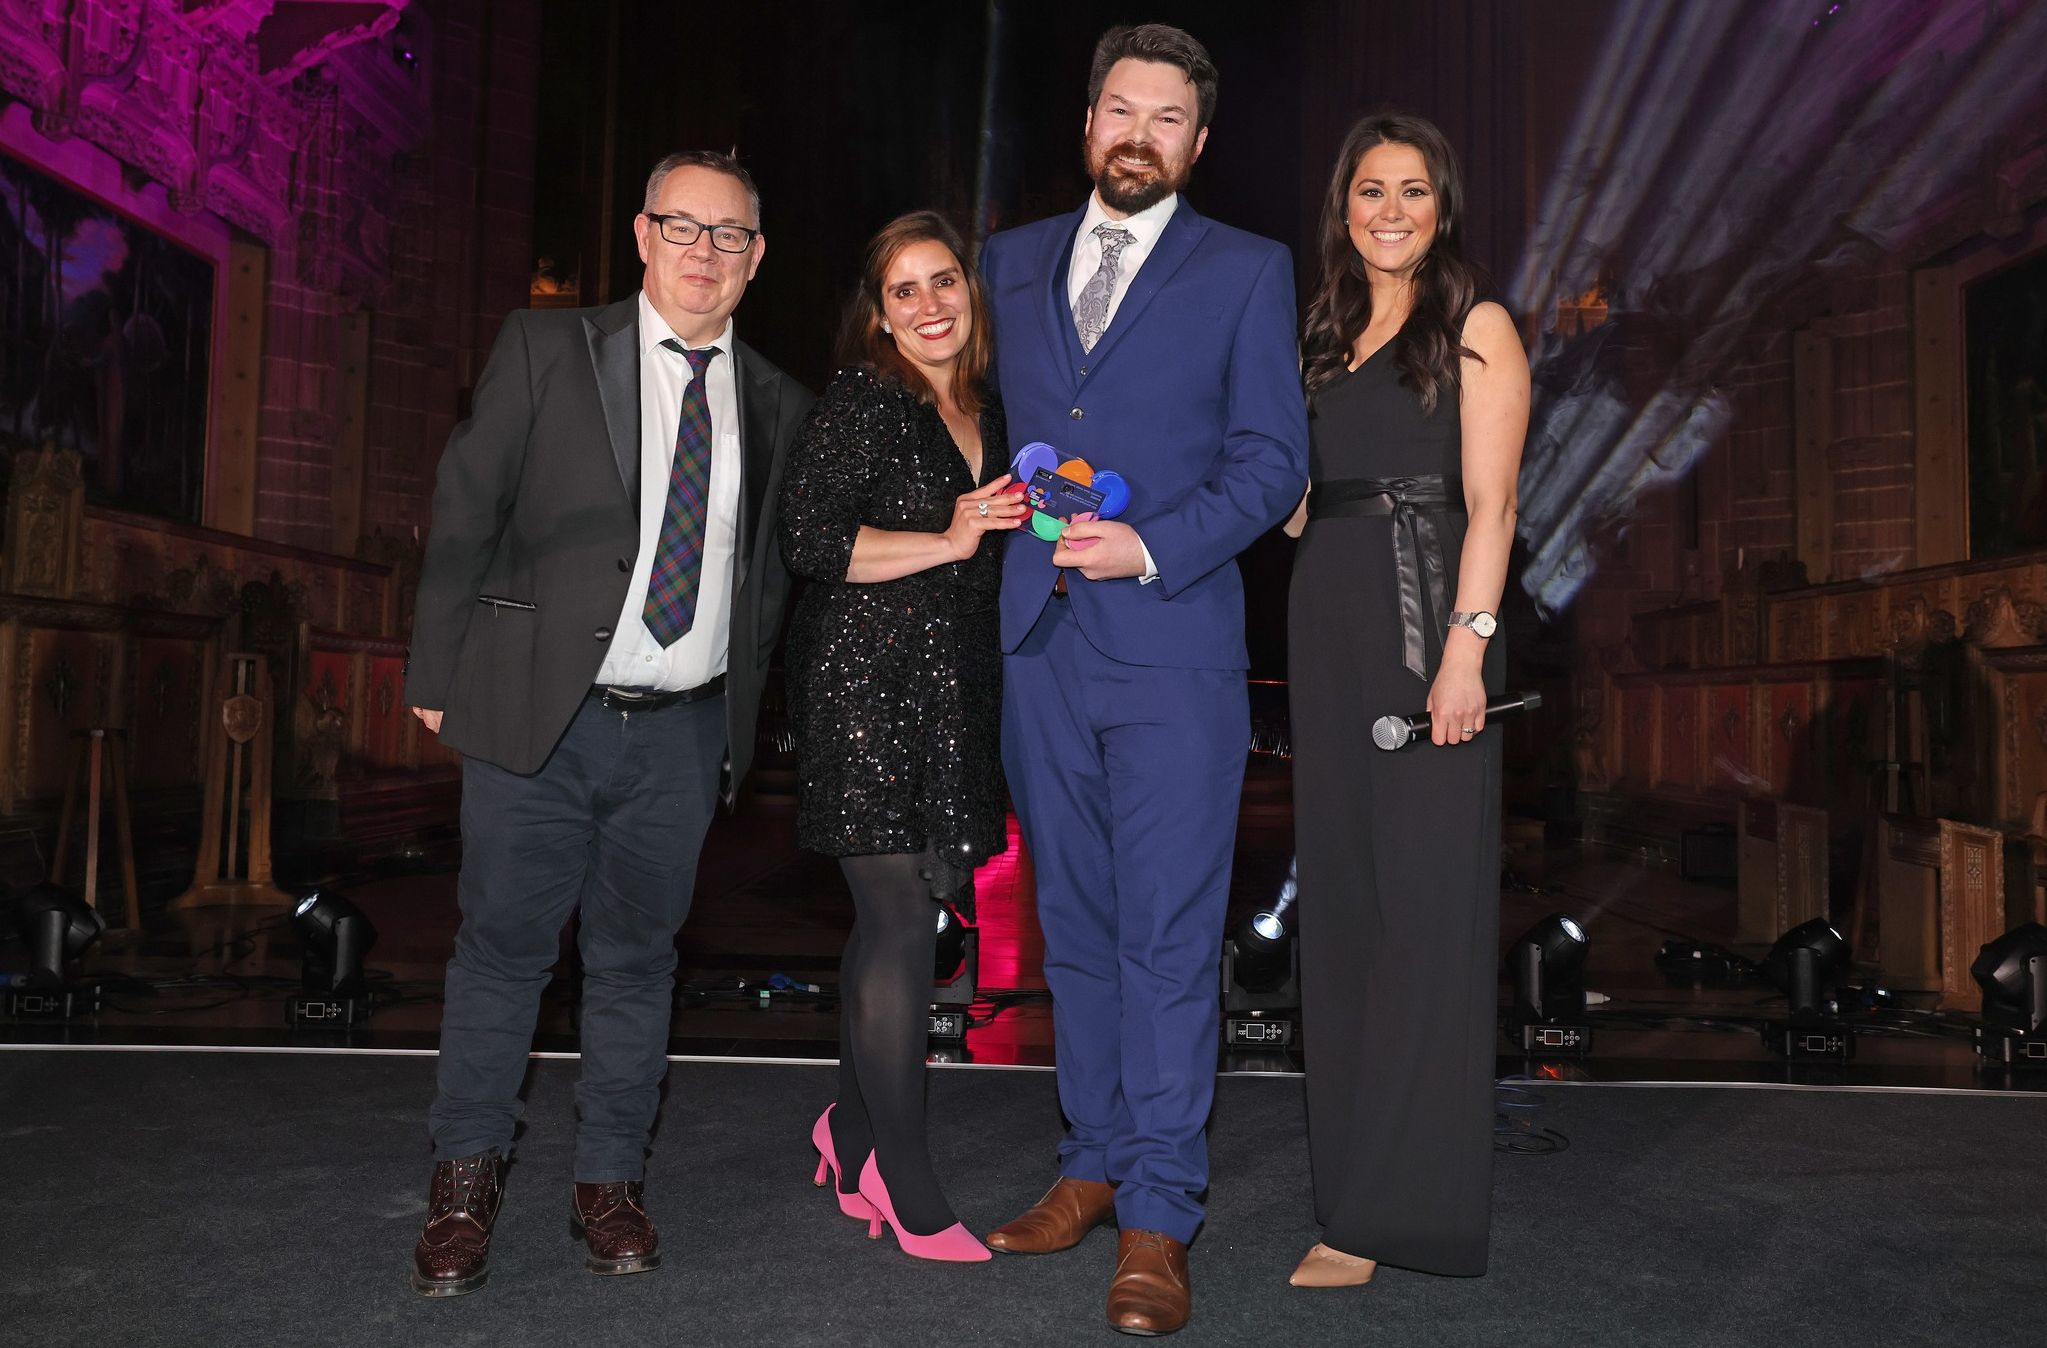 Sunnyside Bed and Breakfast, on Bath Street in Southport town centre, owned by Anthony and Larissa Duffey, won the 2023 Liverpool City Region B&B and Guest House of the Year Award. 